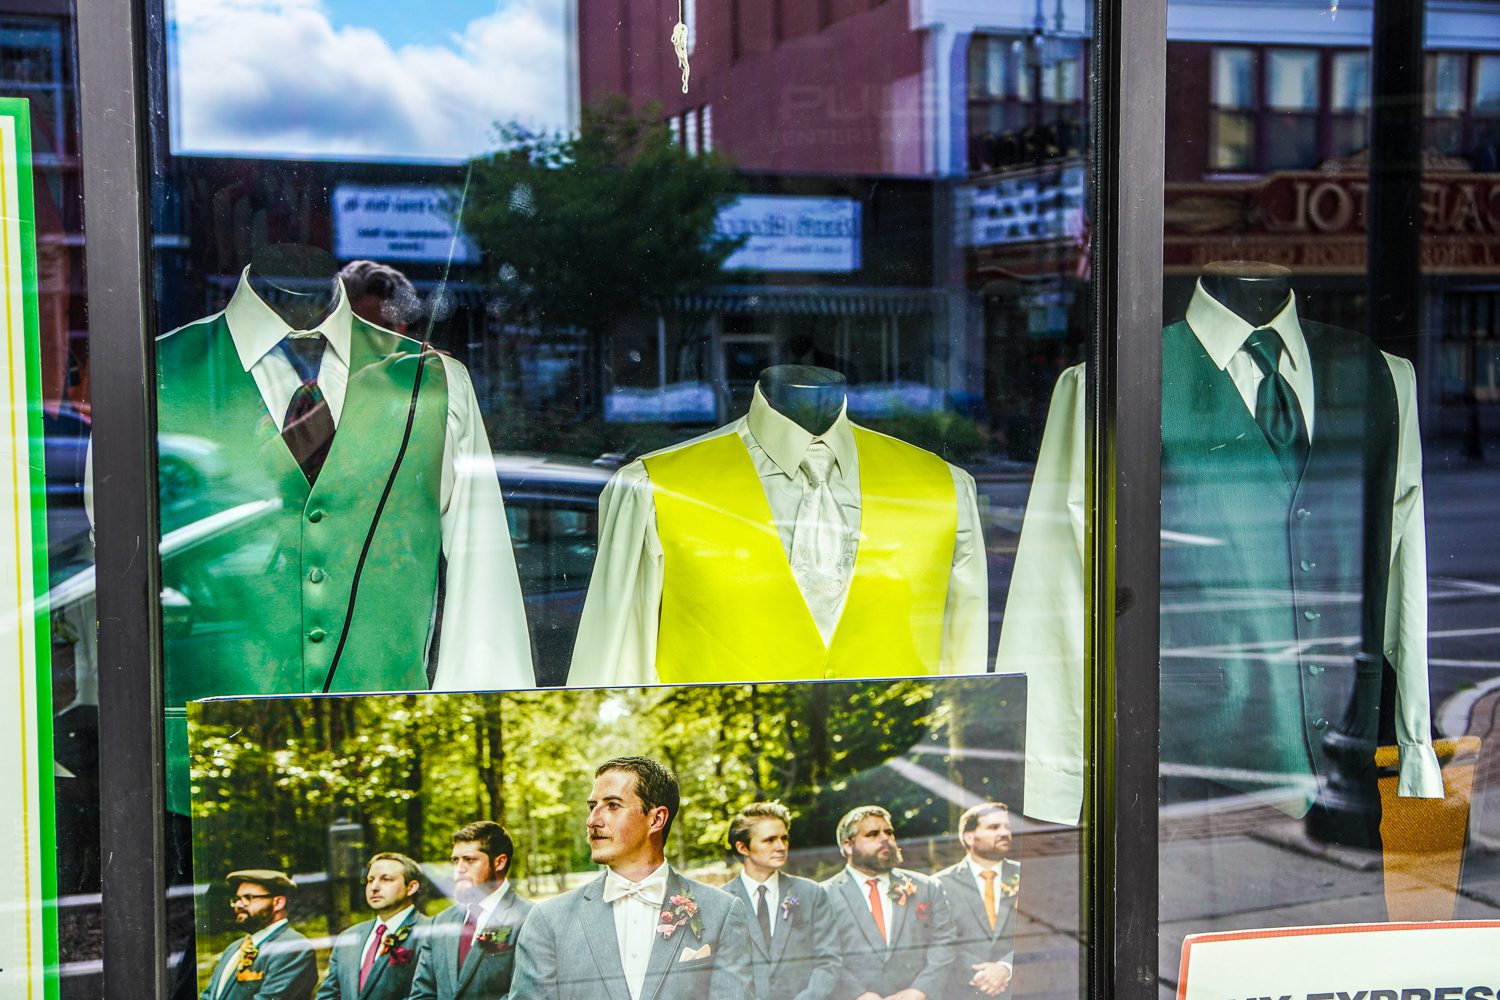 I loved these lime green suit vests in Pittsfield.